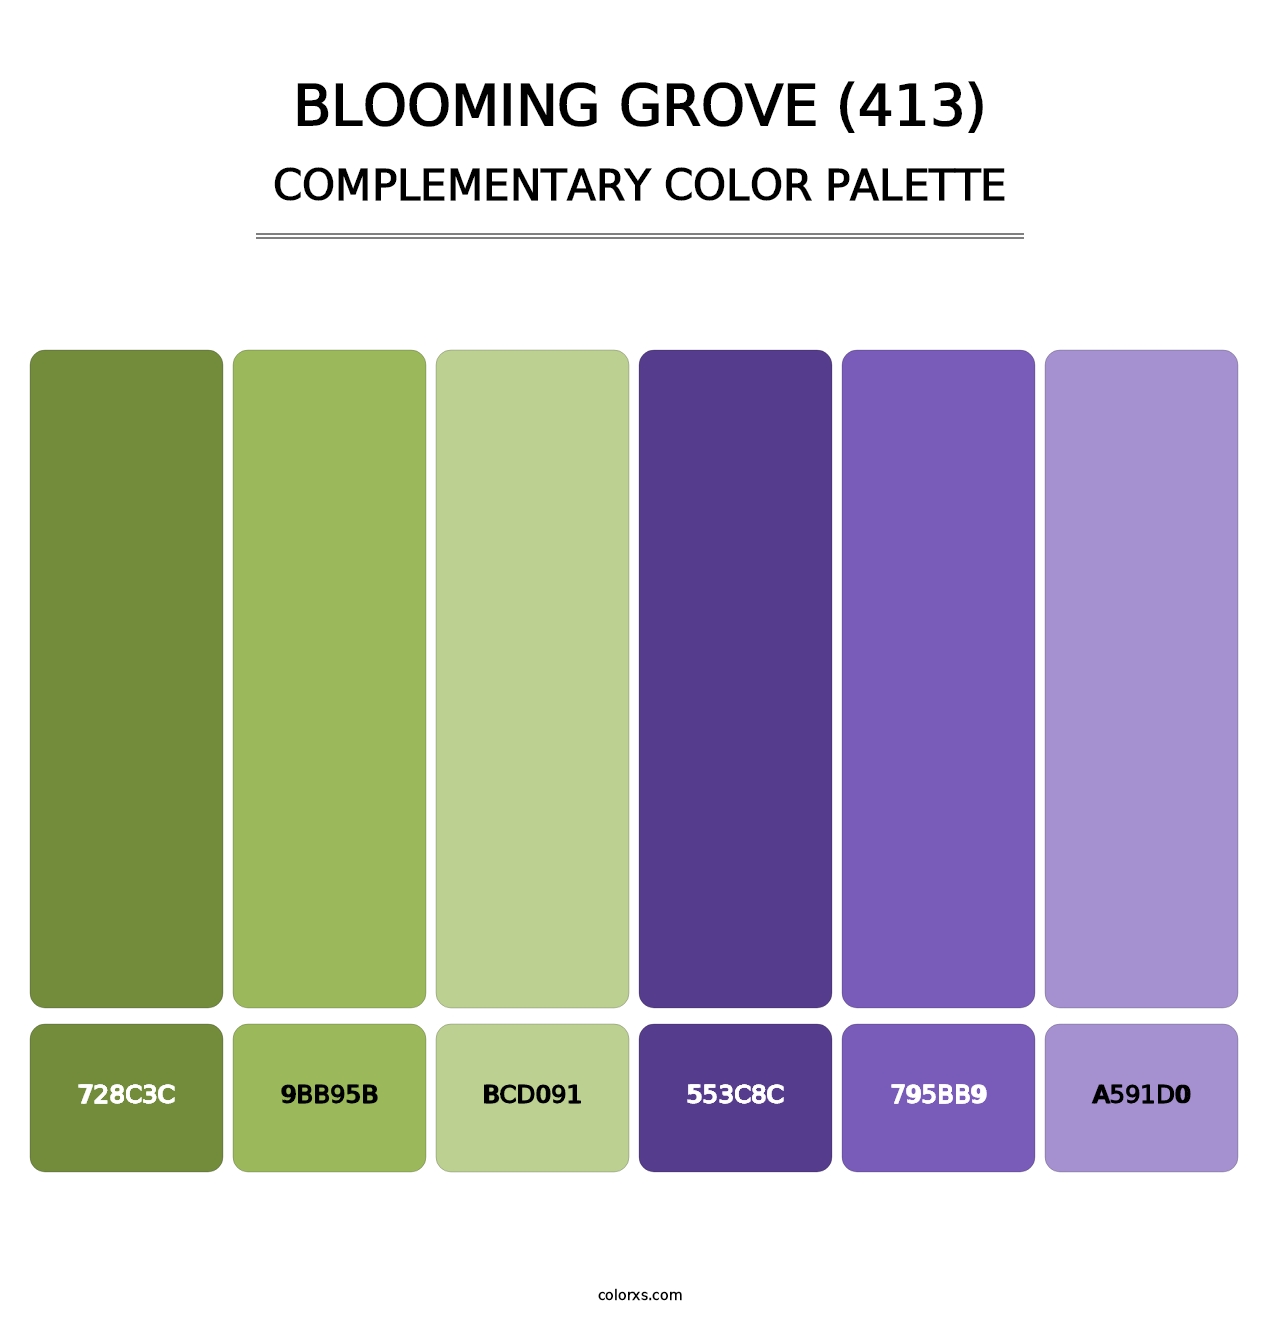 Blooming Grove (413) - Complementary Color Palette